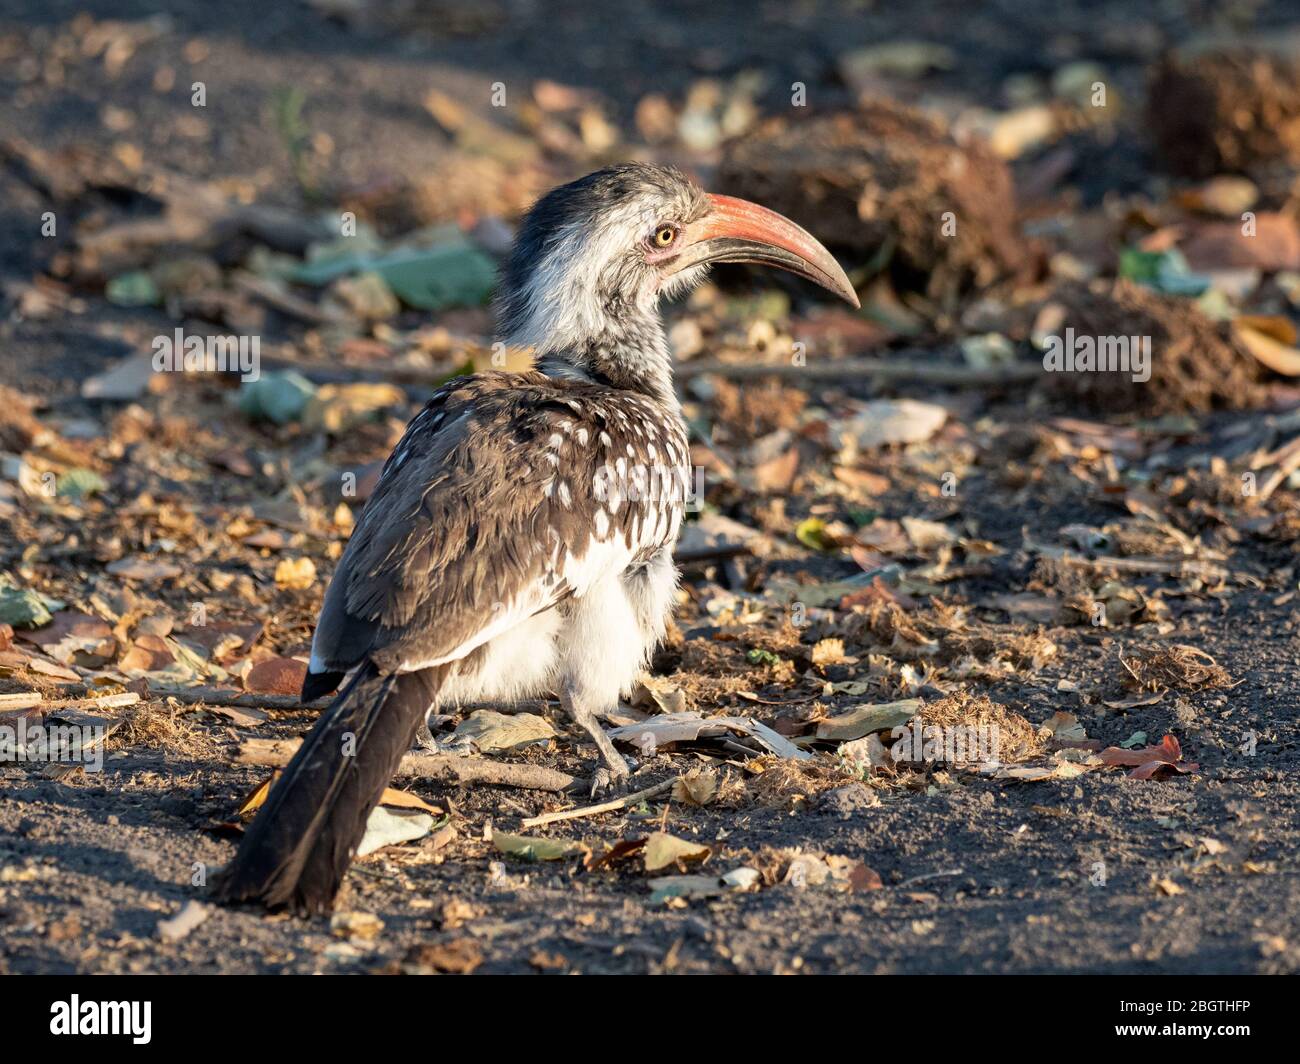 An adult red-billed hornbill, Tockus erythrorhynchus, foraging for insects in Chobe National Park, Botswana, South Africa. Stock Photo